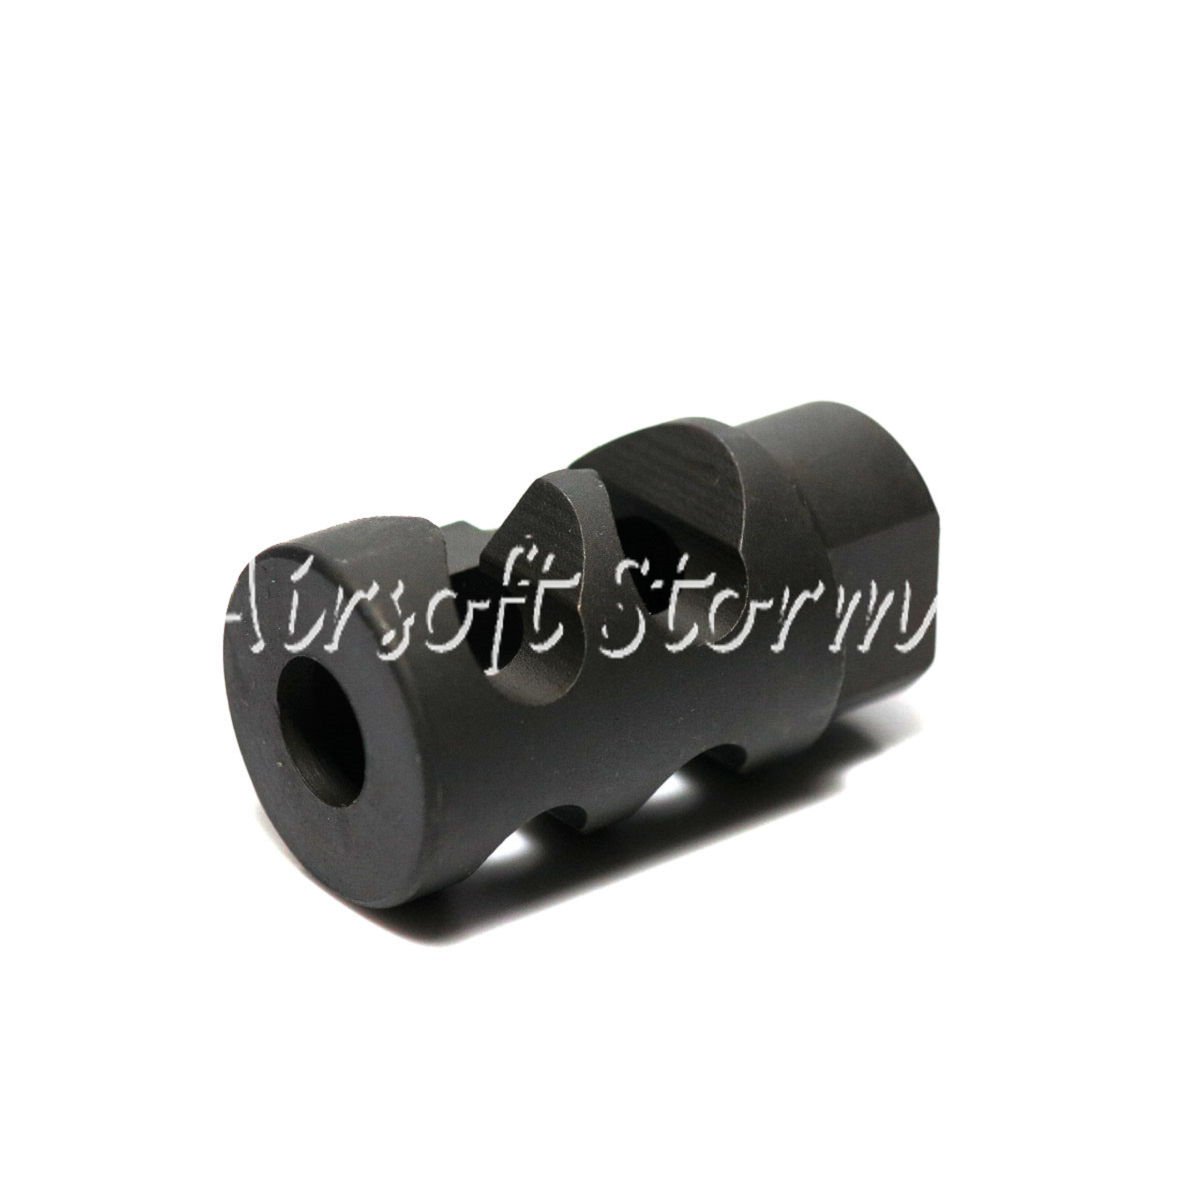 Shooting Gear Army Force DNTC 2.0 Type Steel Flash Hider 14mm CCW Black